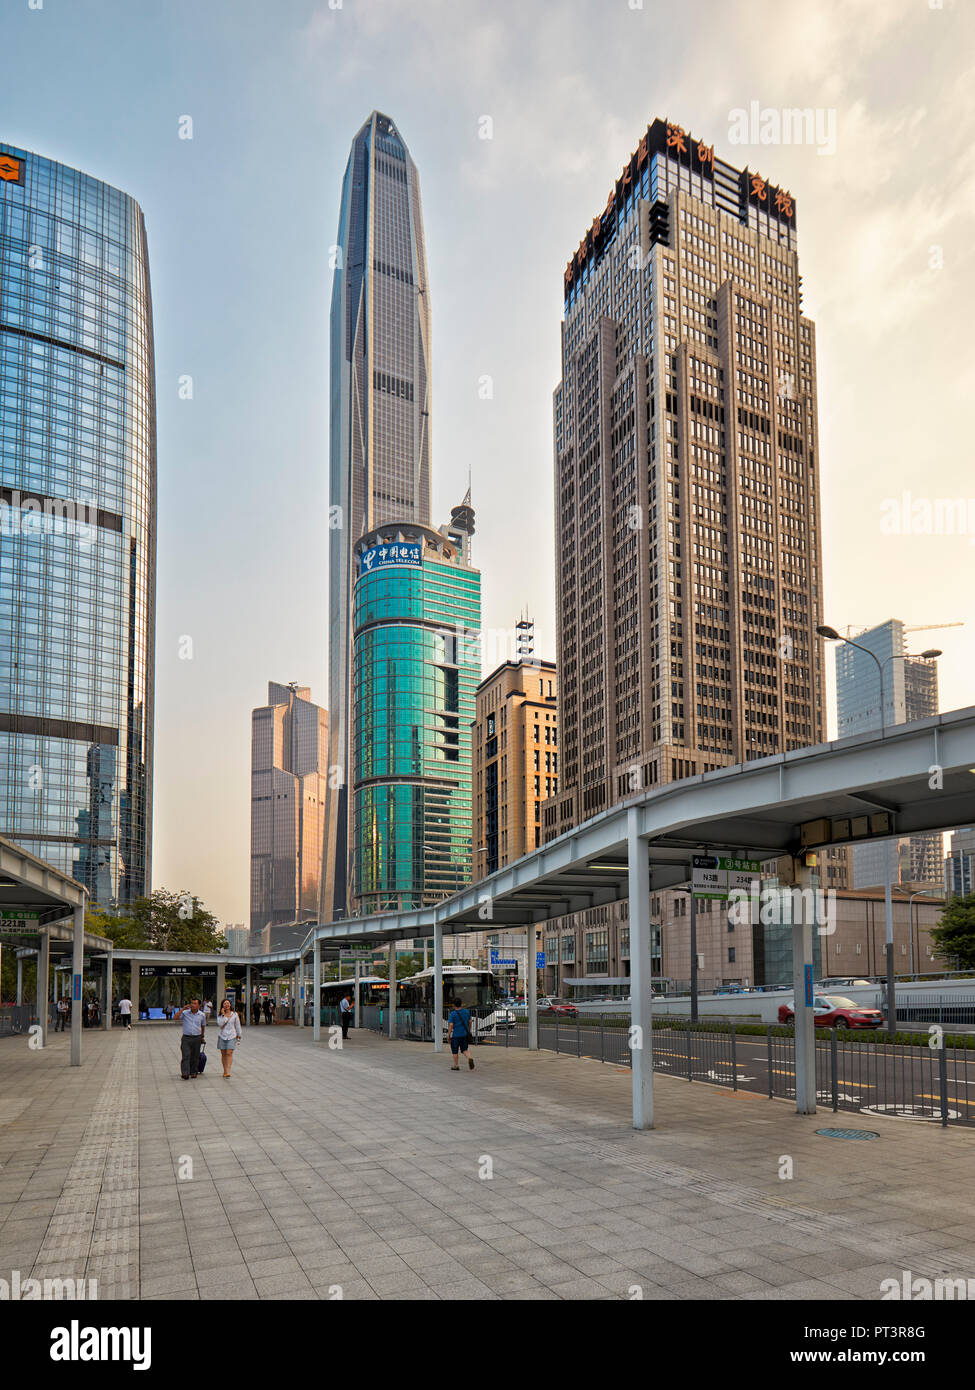 Hochhäuser in Futian Central Business District (CBD). Shenzhen, Guangdong Province, China. Stockfoto